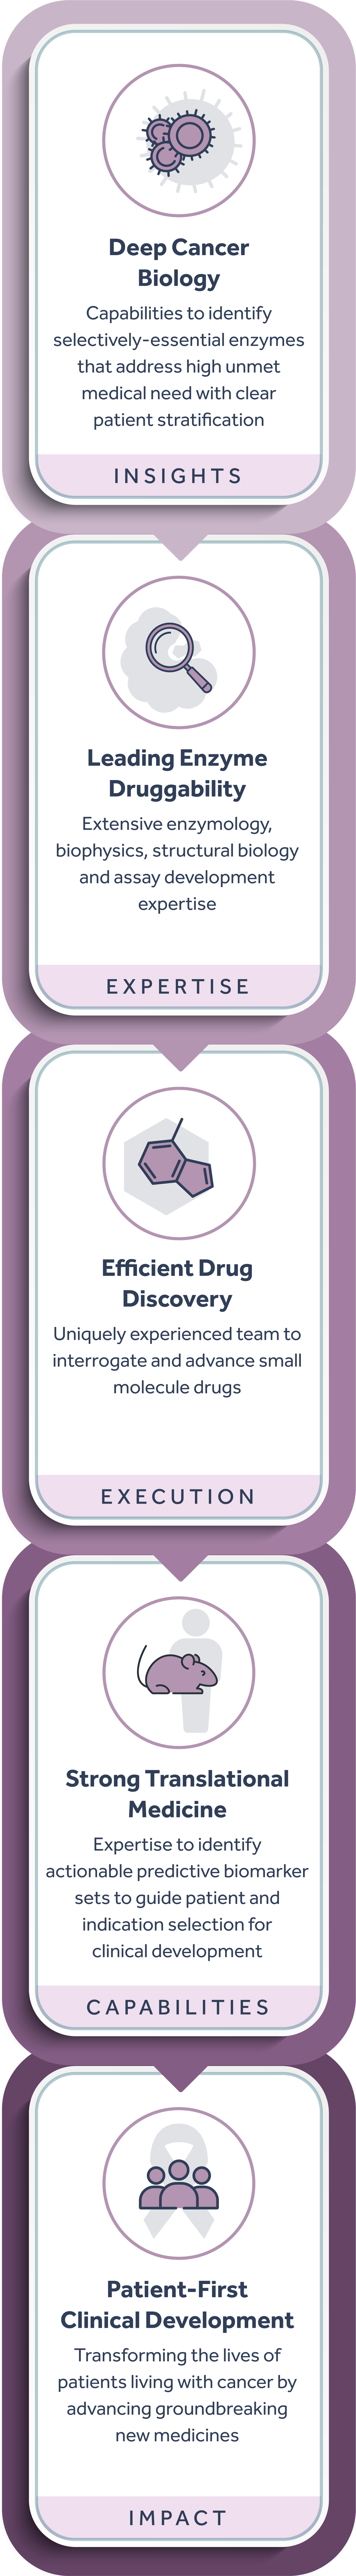 5-panel graphic outlining Accent integrated capabilities, including deep cancer biology, lead enzyme druggability, efficient drug discovery, strong translational medicine, and clinical development.